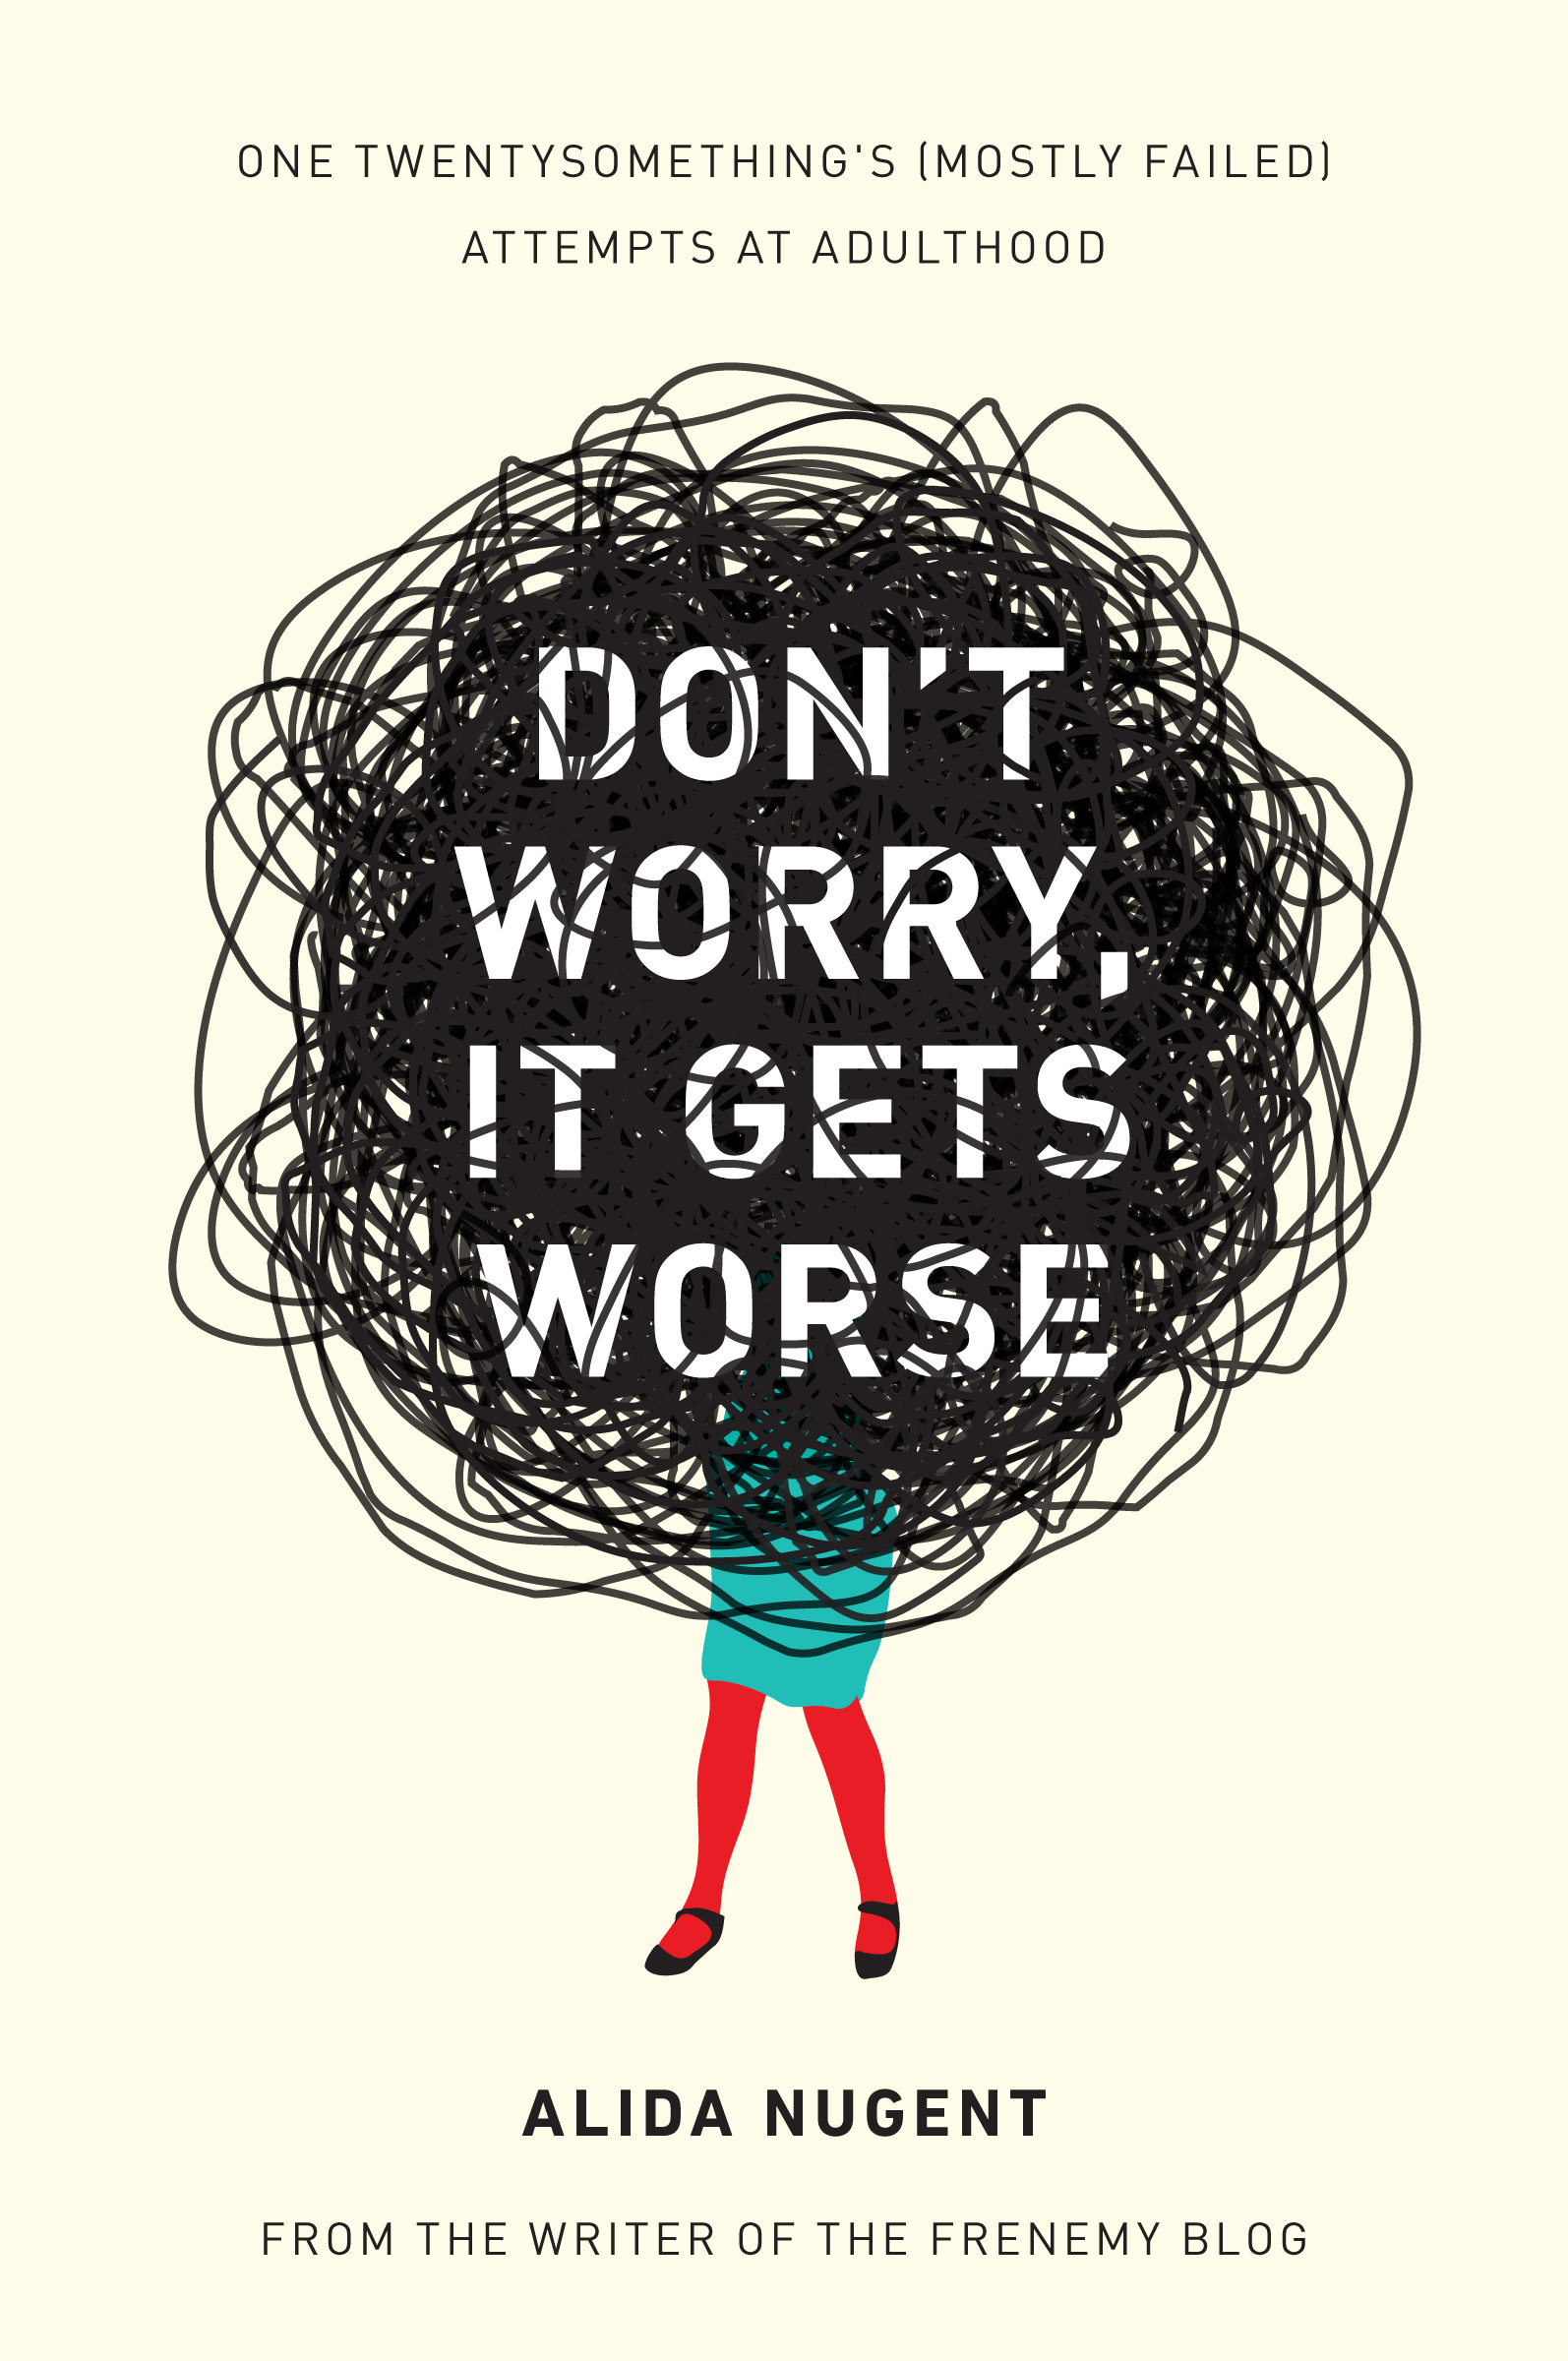 Book Launch: Don't Worry, It Gets Worse: One Twentysomething's (Mostly Failed) Attempts at Adulthood by Alida Nugent